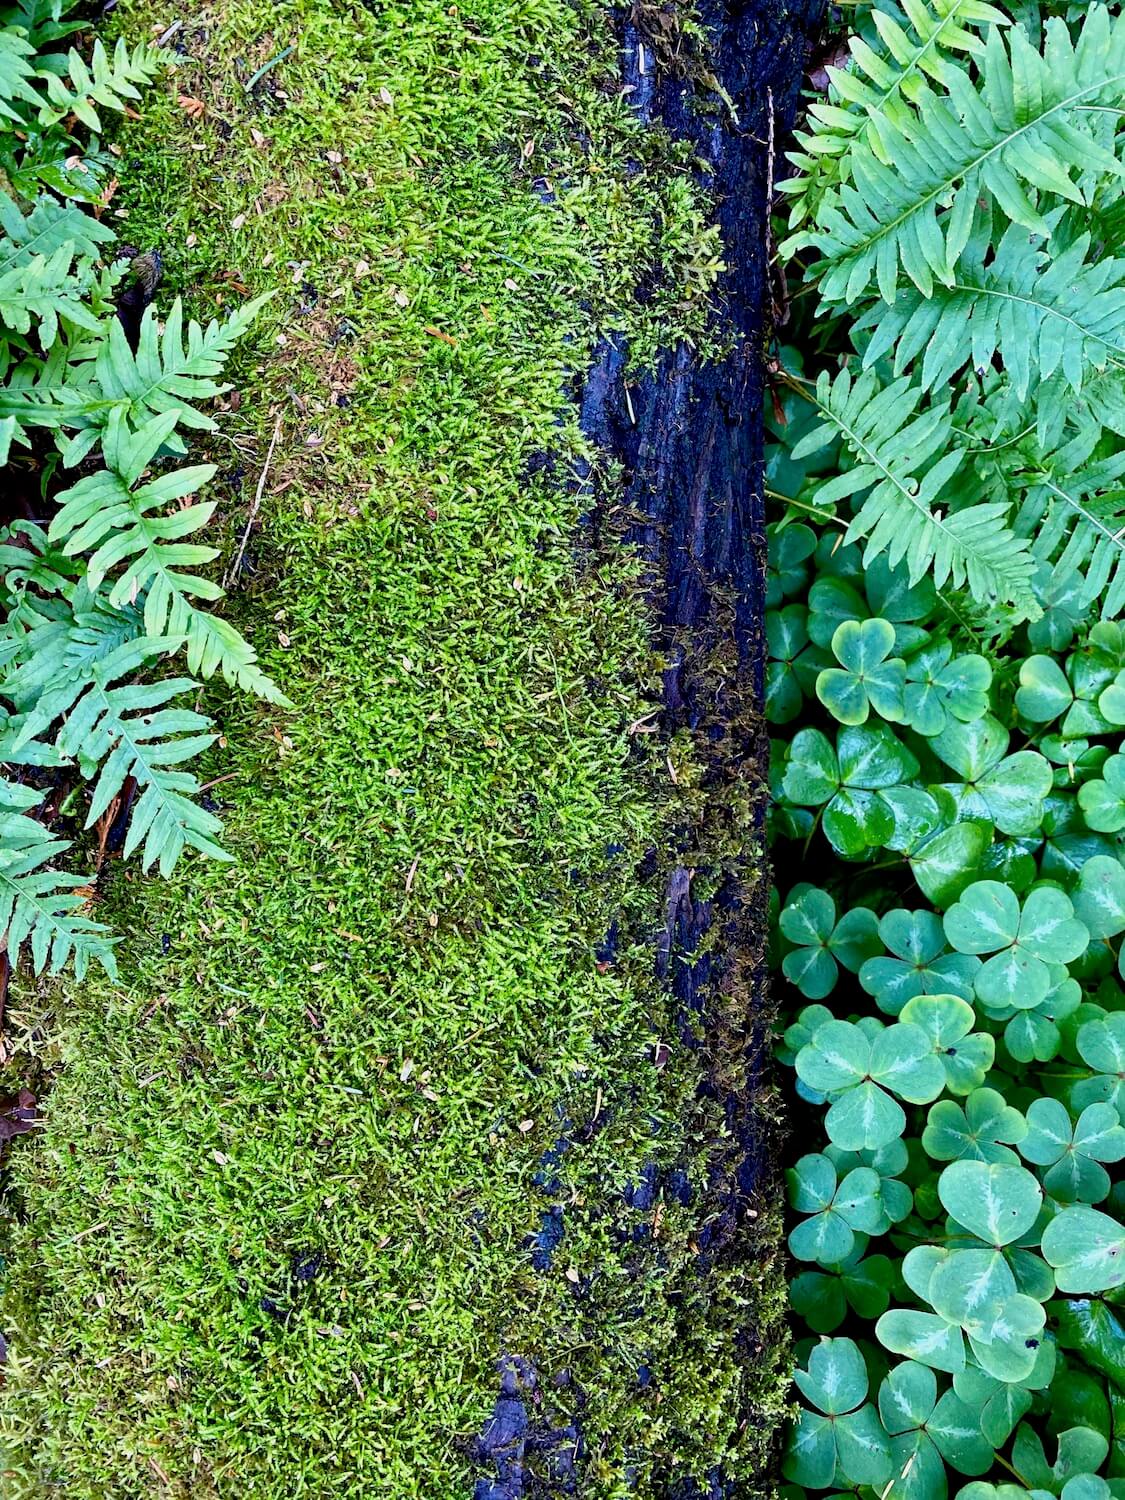 A moss covered fallen log is nestled in between bright green clover pants and tiny fern fronds.